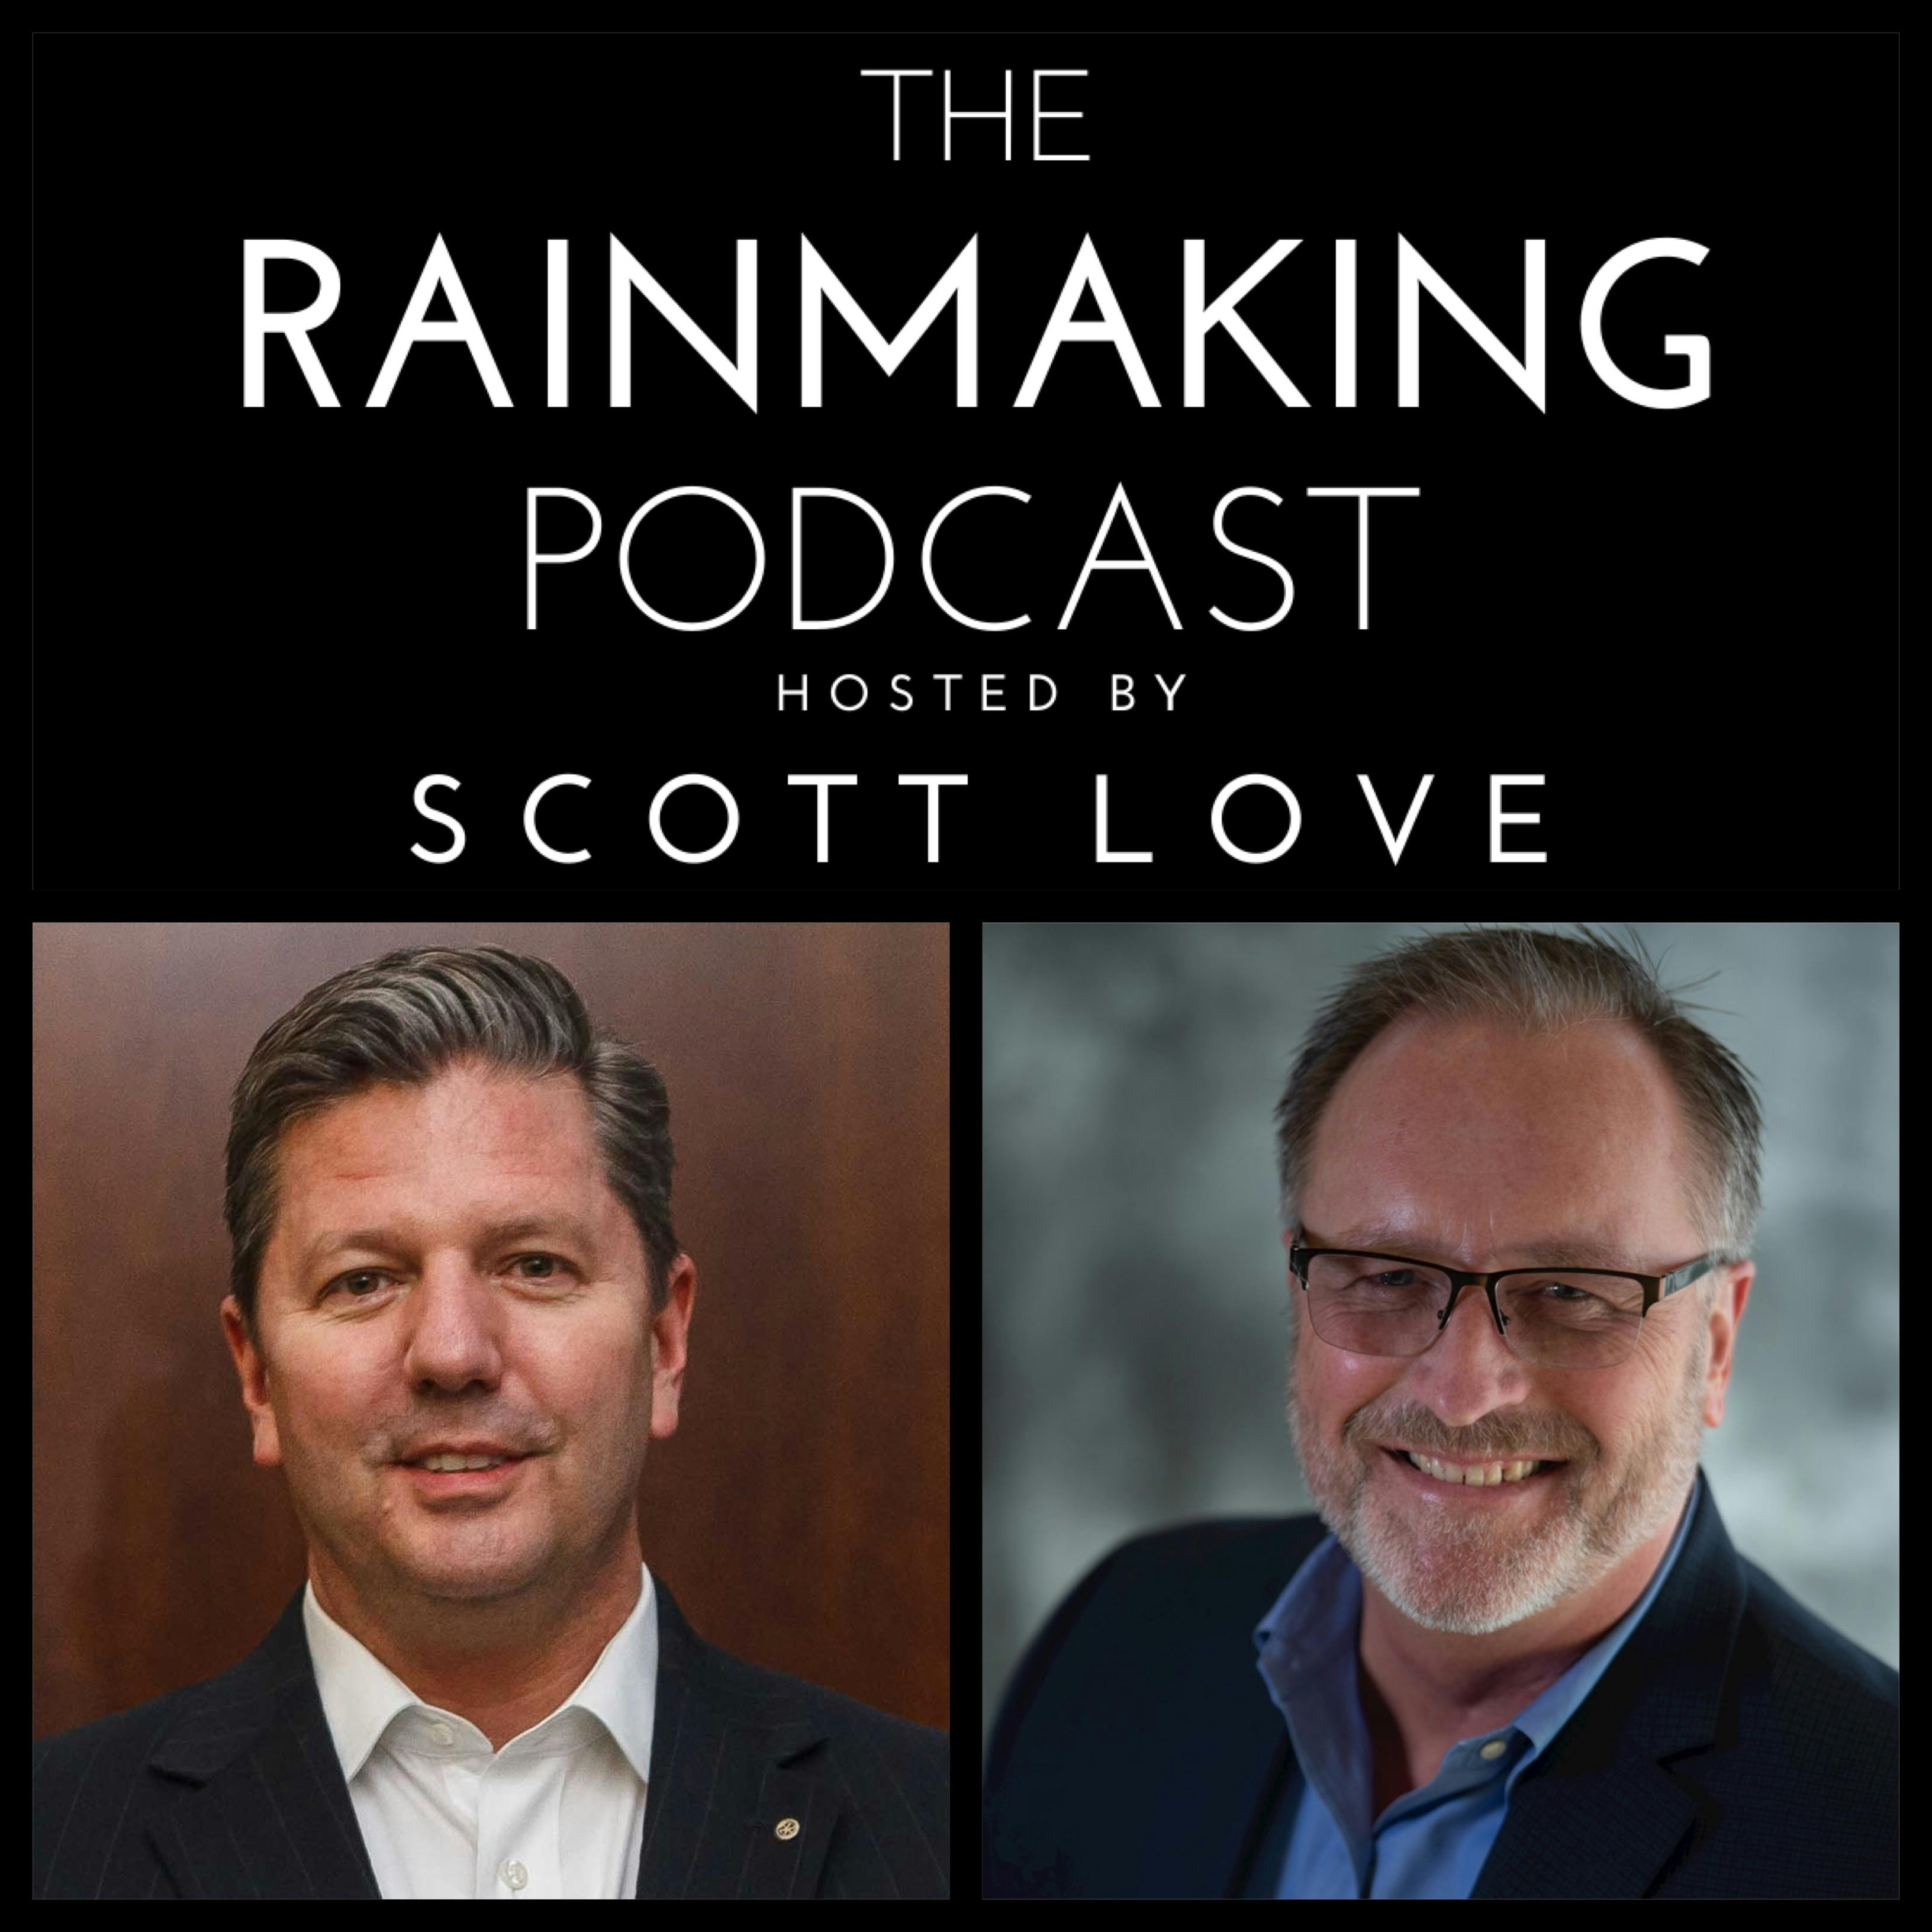 TRP 0075 Tactical Tips for Professional Services Rainmaking with Mark Roberts